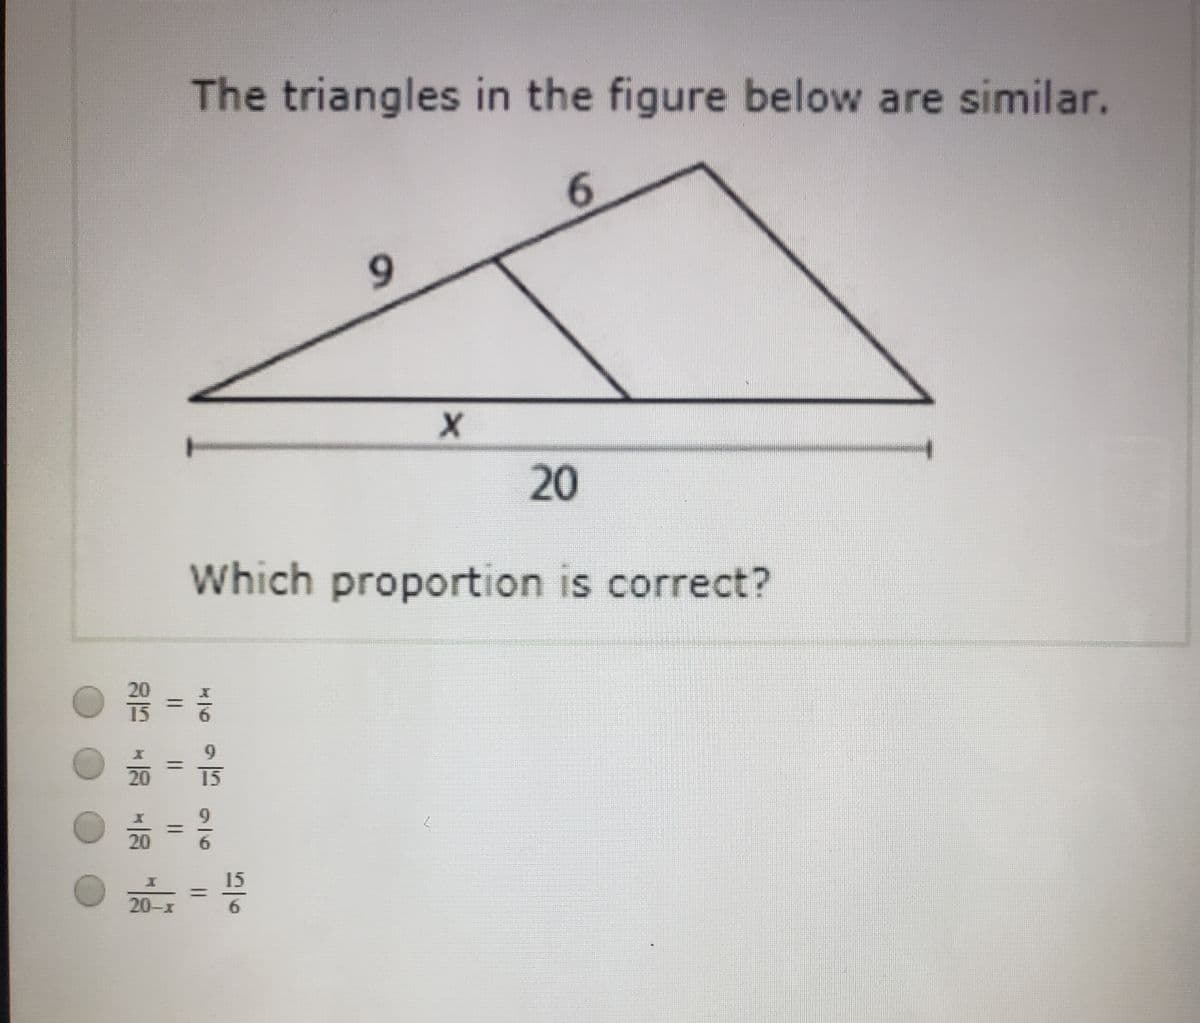 The triangles in the figure below are similar.
6.
20
Which proportion is correct?
20
15
6.
20
15
20
20-x
6
96
